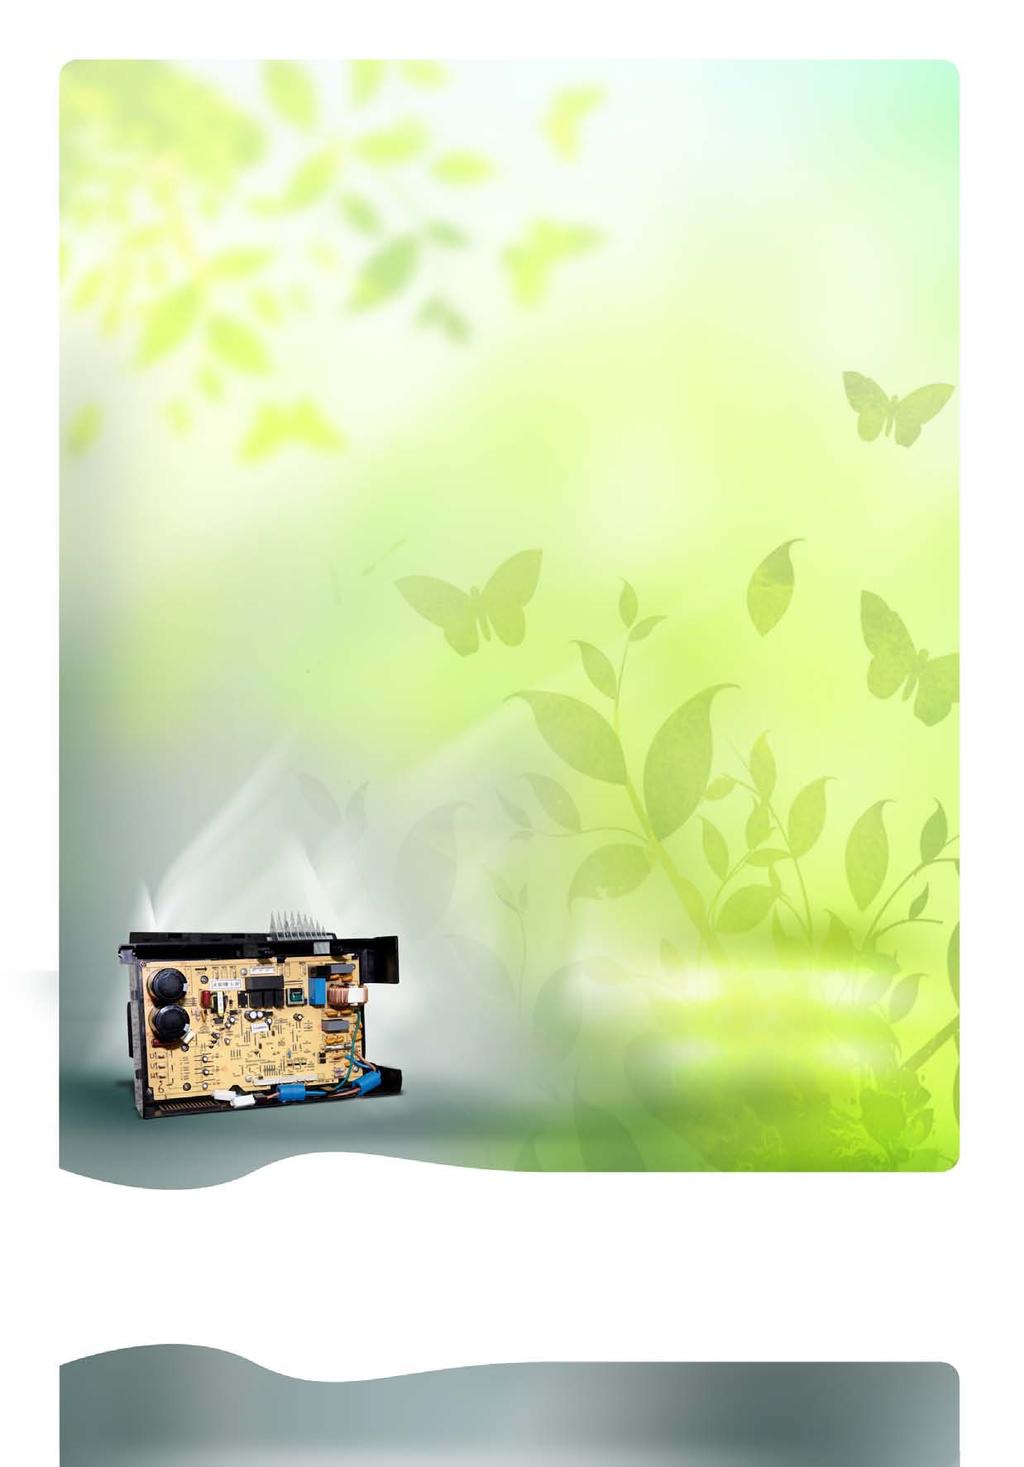 Every second A/C system in the world is equipped with Inverter Technology SANHUA IS PROVIDING INVERTER CONTROLLER SOLUTIONS TO ITS CUSTOMERS HELPING THEM TO